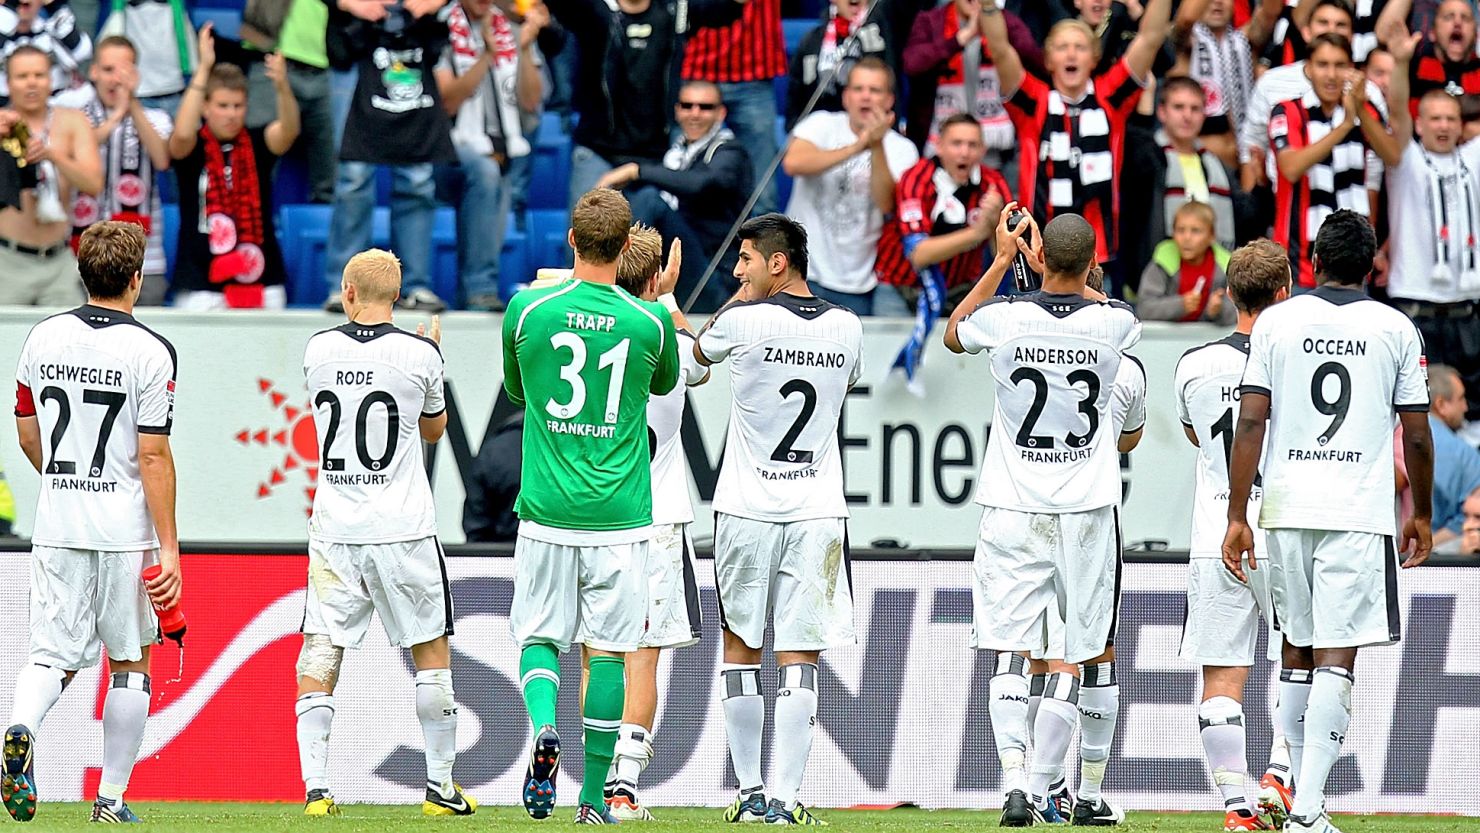 Eintracht Frankfurt's players salute the crowd after their 4-0 win at Hoffenheim in the Bundesliga